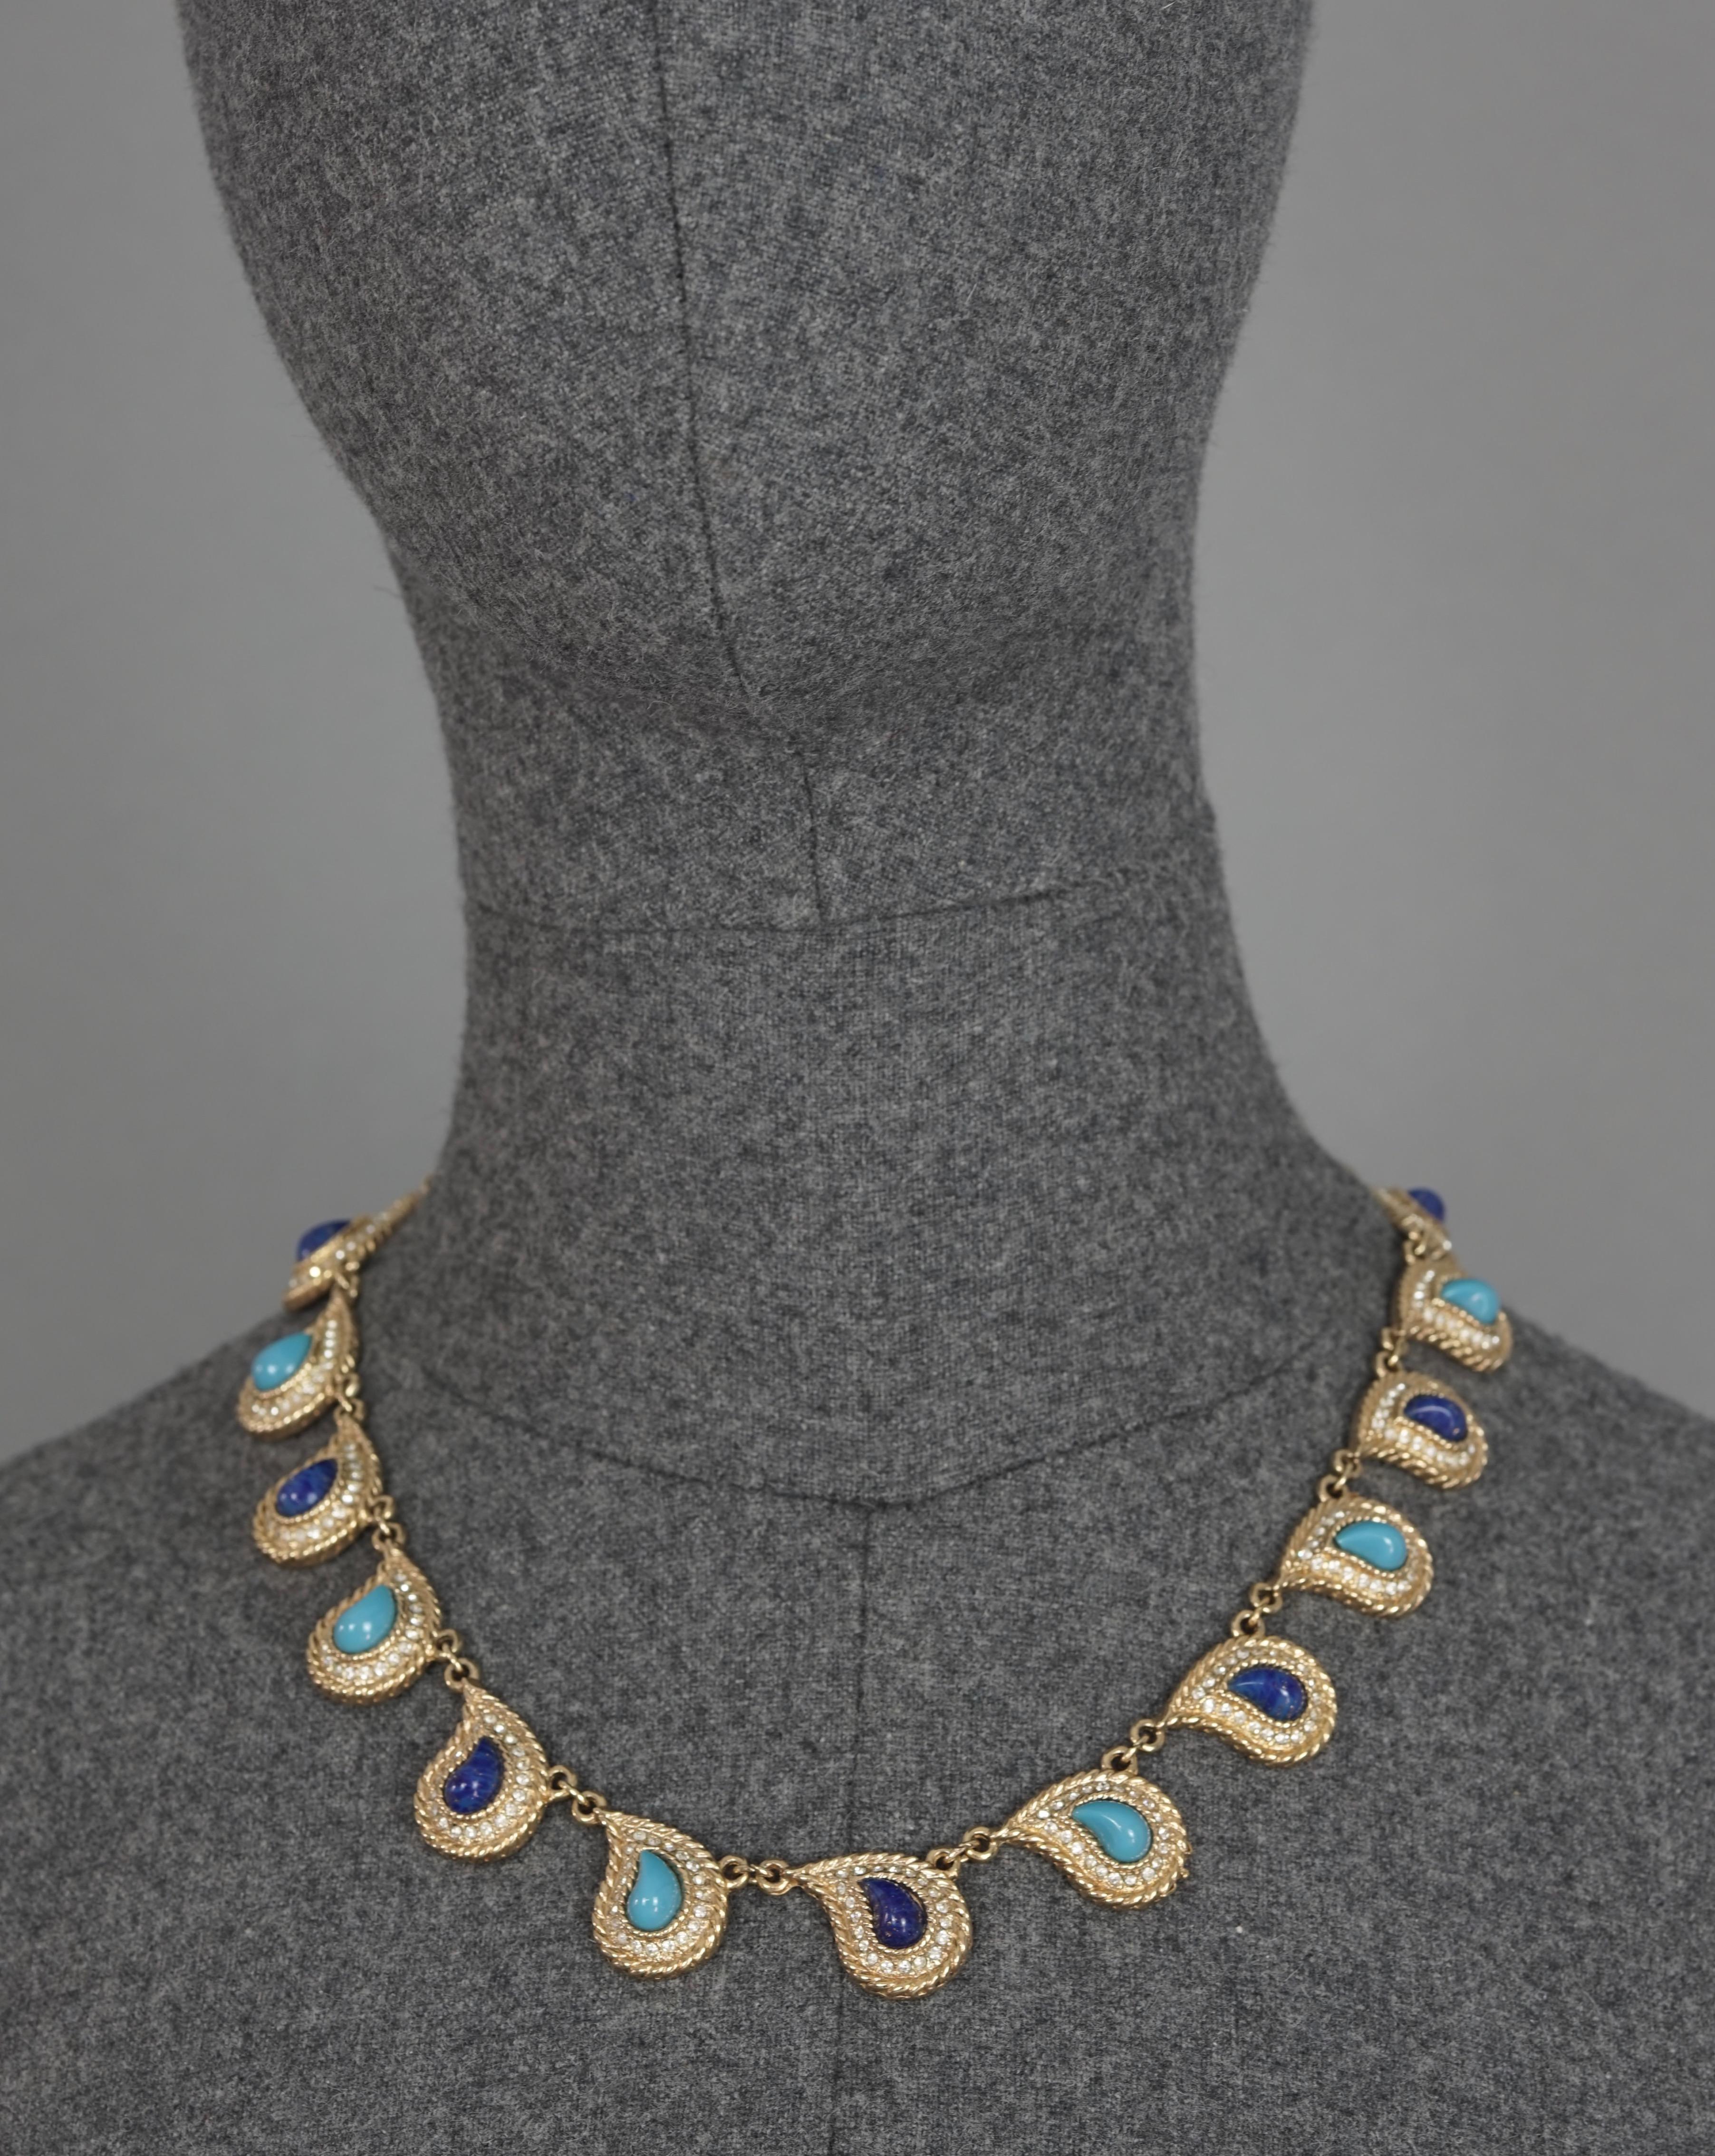 Vintage CHRISTIAN DIOR Paisley Turquoise Lapis Lazuli Cabochon Rhinestone Necklace

Measurements:
Height: 0.78 inch (2 cm)
Width: 15.75 inches to 17.71 inches (40 cm to 45 cm)

Features:
- 100% Authentic CHRISTIAN DIOR.
- Paisley links of turquoise